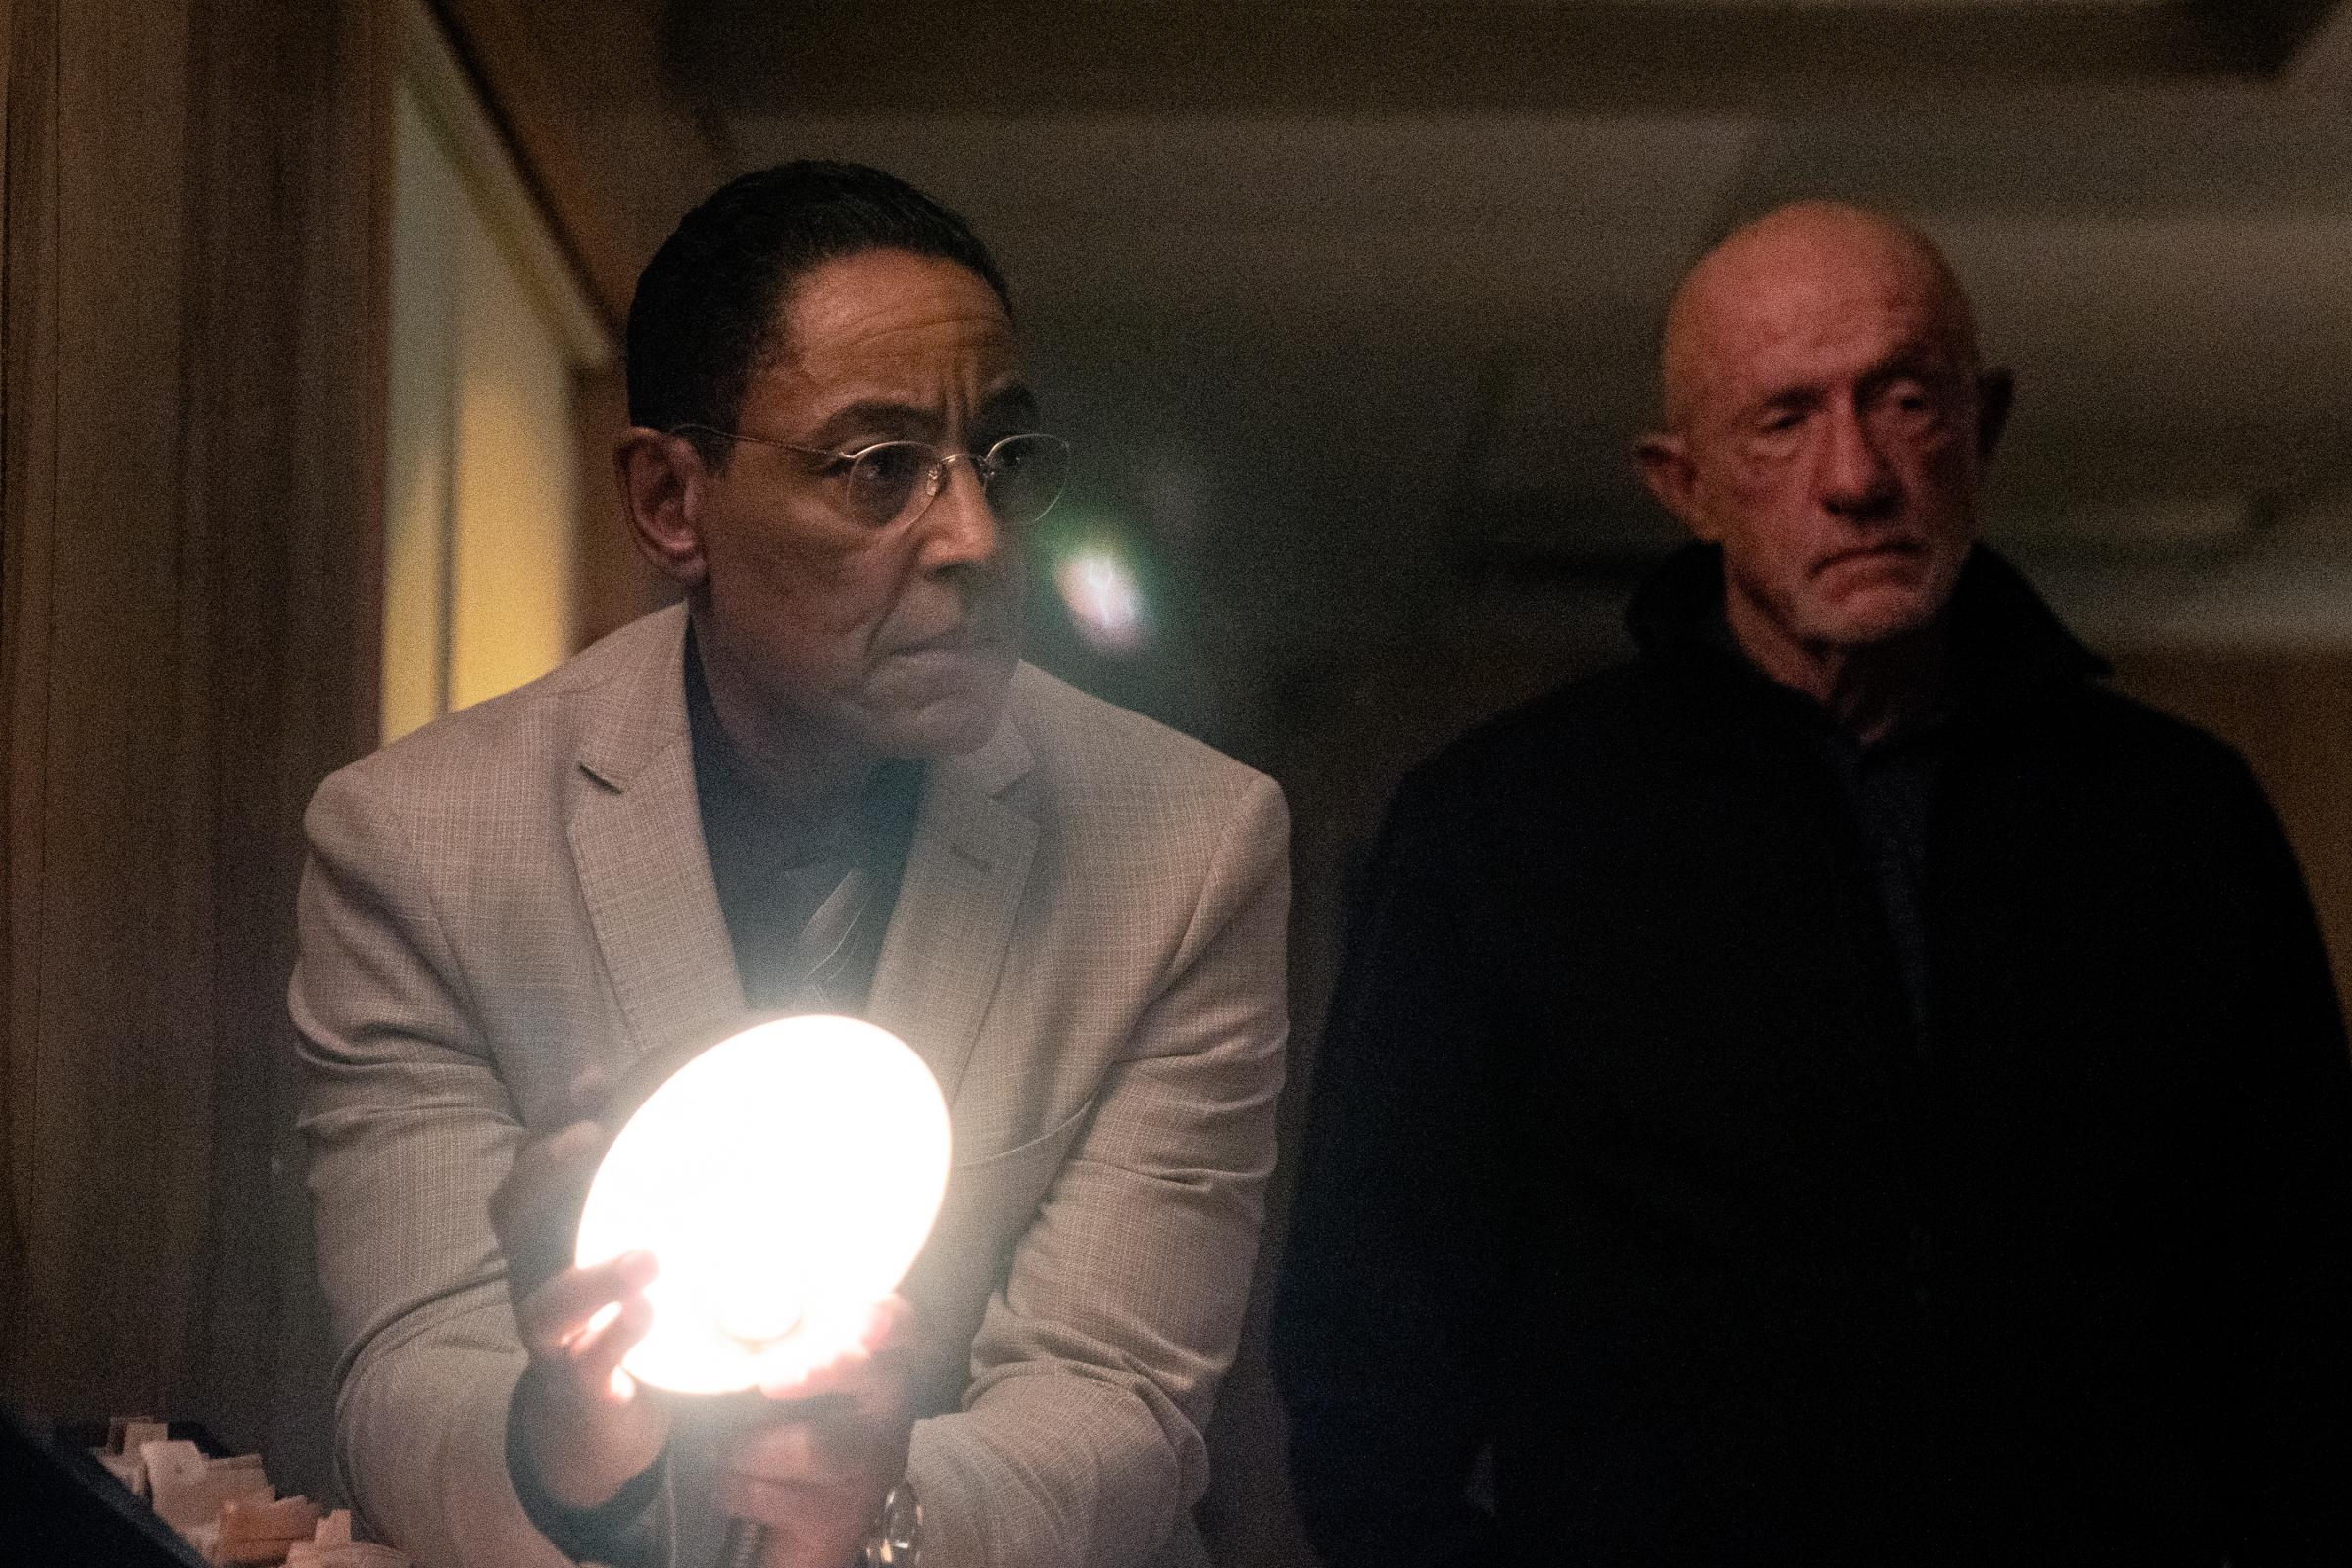 Giancarlo Esposito as Gus Fring, Jonathan Banks as Mike Ehrmantraut - Better Call Saul _ Season 6 - Photo Credit: Greg Lewis/AMC/Sony Pictures Television